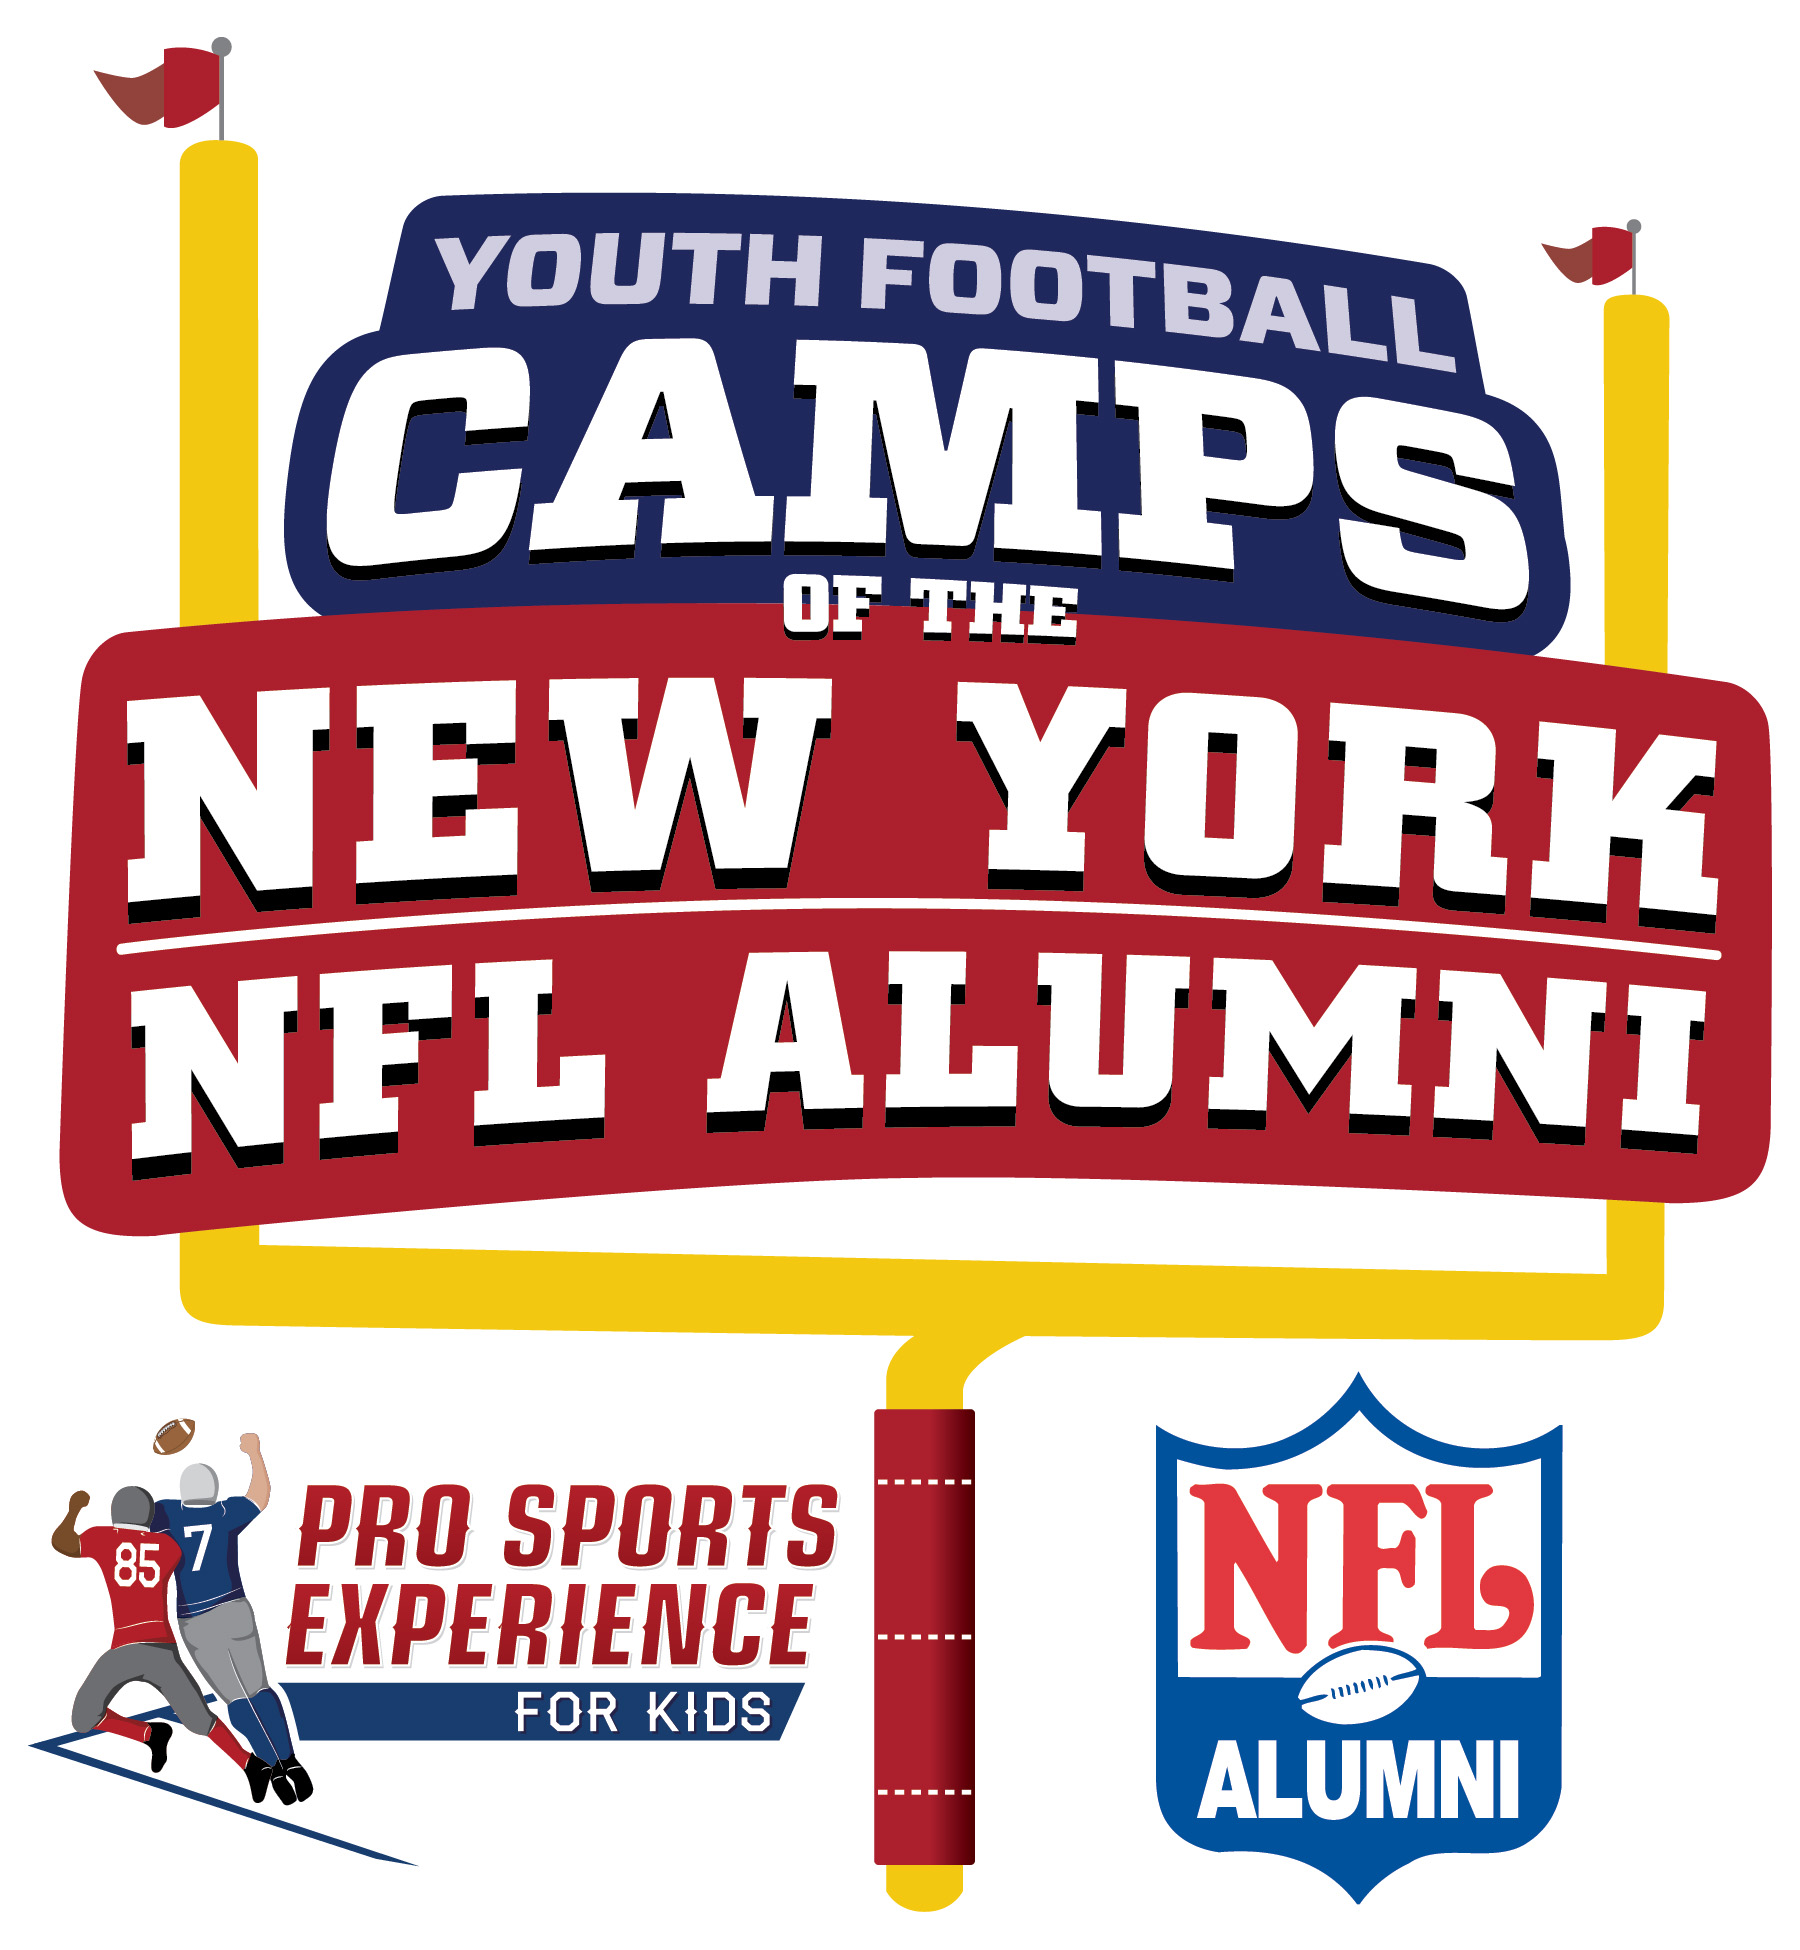 Westport, CT, M-F, July 11-15, 3:00pm to 6:00pm - Pro Sports Experience